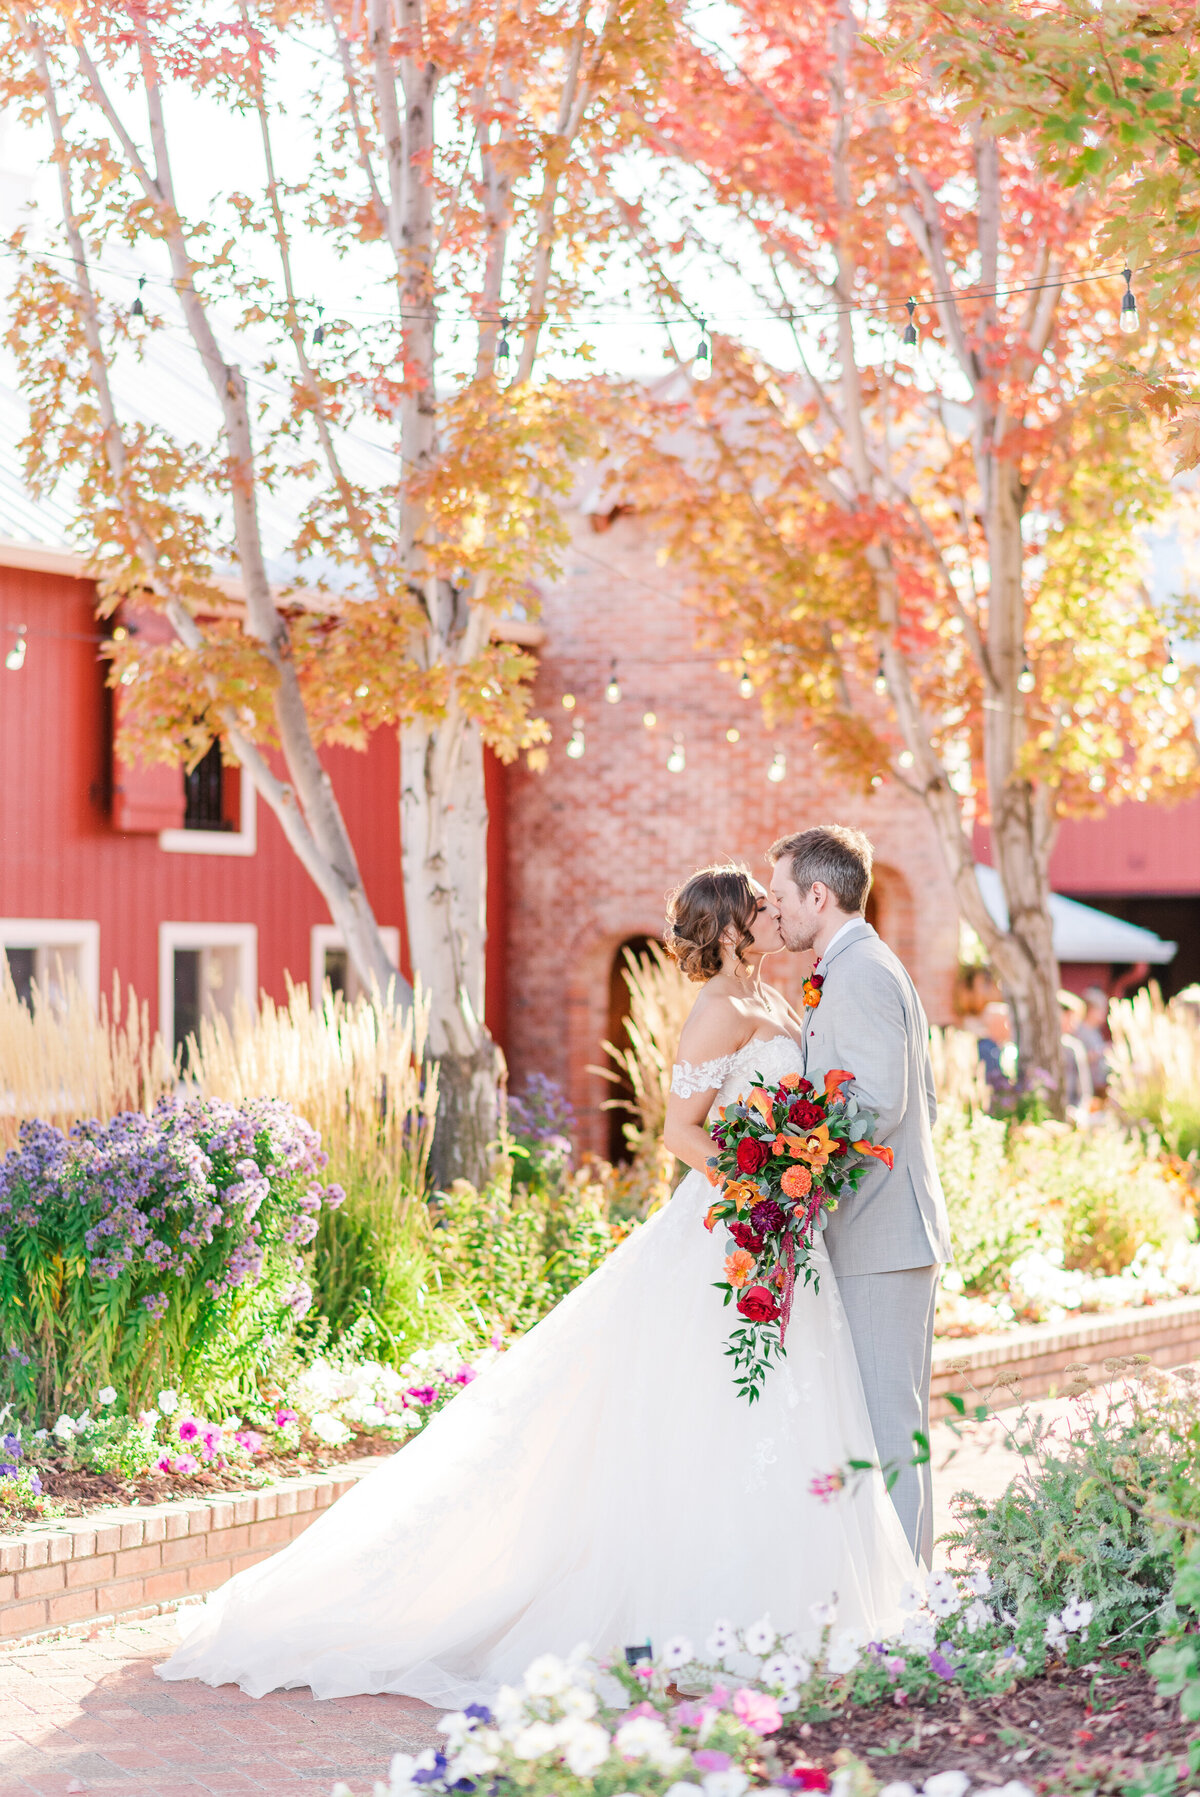 Bride and groom kissing for a wedding portrait at Crooked Willow Farms after their ceremony in the fall.